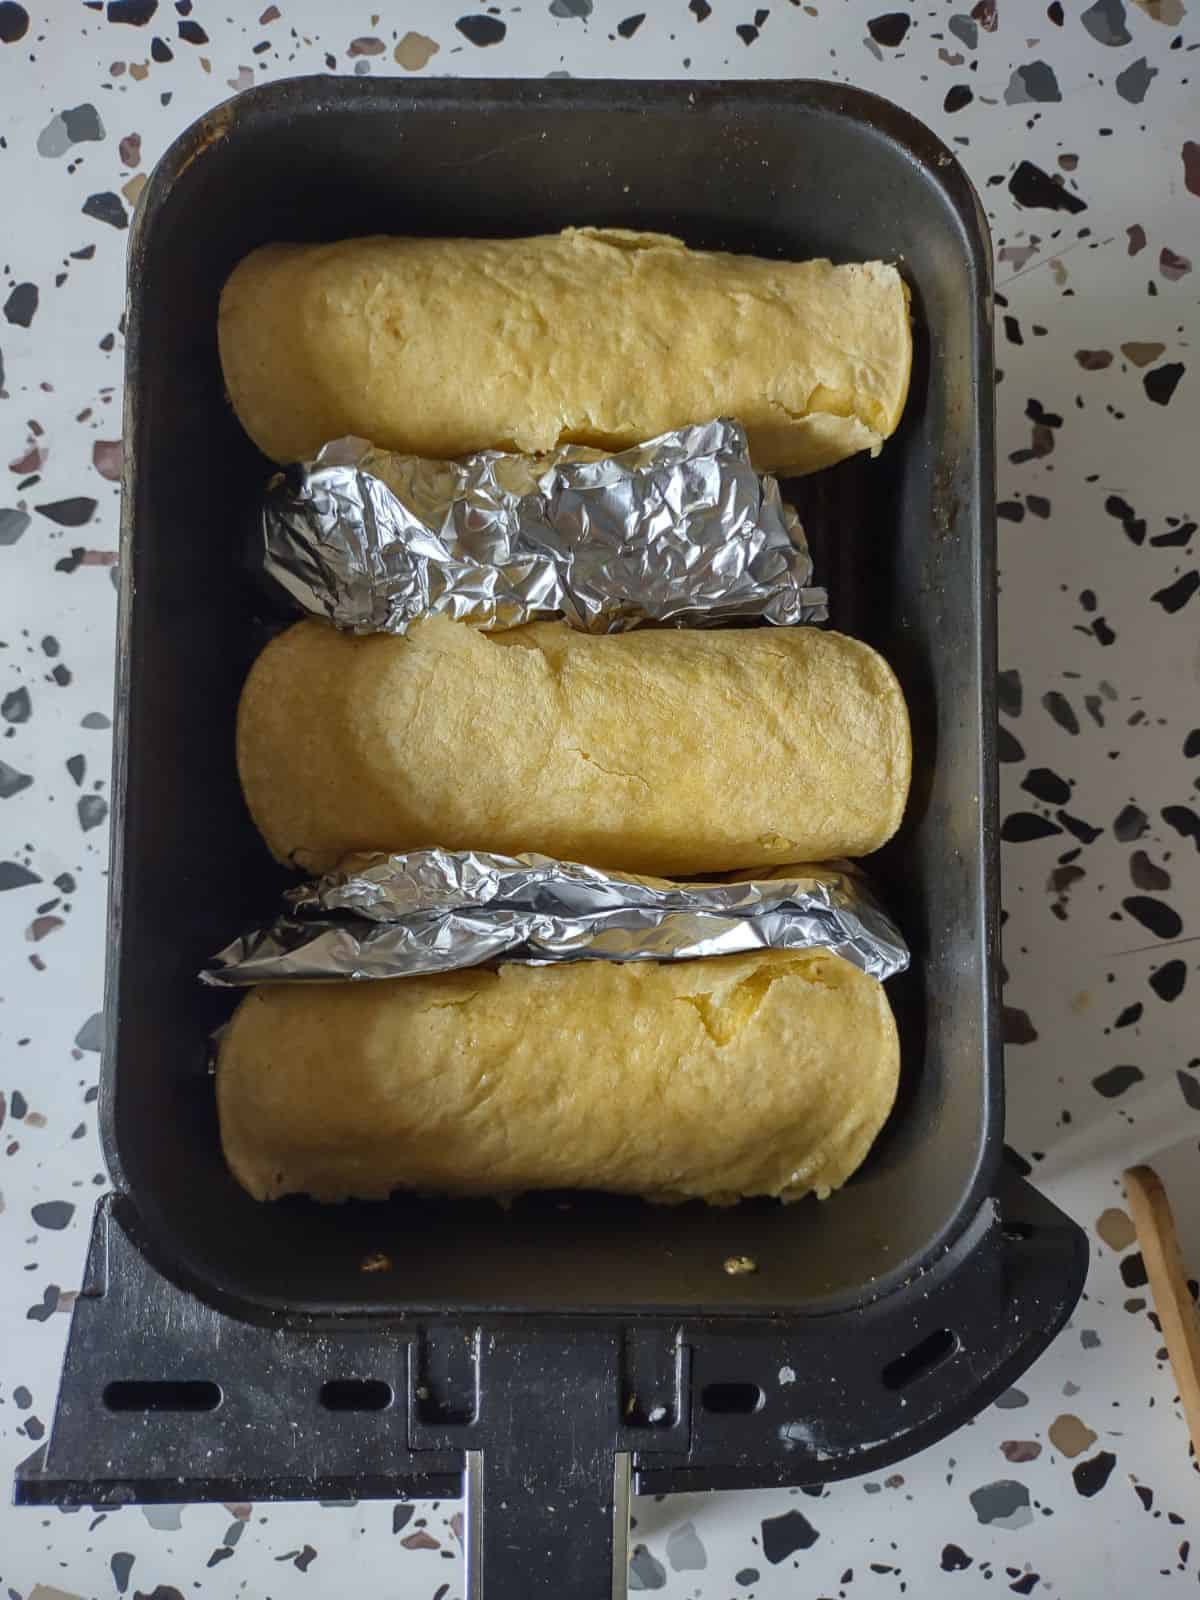 Corn tortilla that are stuffed with foil and turned upside down and placed in an air fryer basket with some foil wedges between the tortillas. 